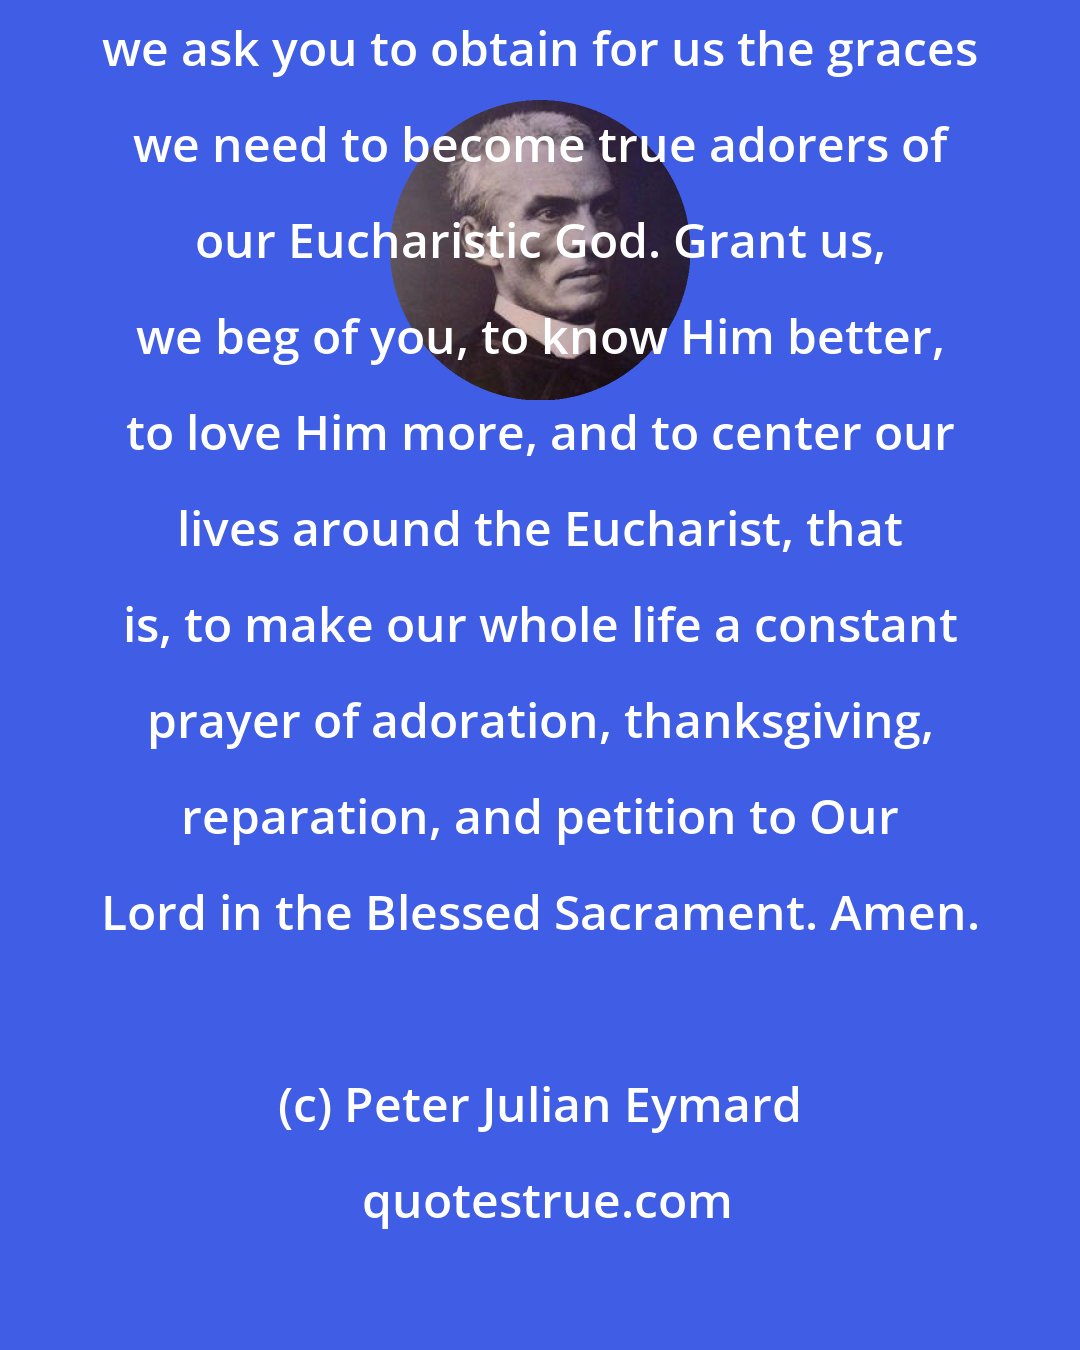 Peter Julian Eymard: Virgin Immaculate, perfect lover of Our Lord in the Blessed Sacrament, we ask you to obtain for us the graces we need to become true adorers of our Eucharistic God. Grant us, we beg of you, to know Him better, to love Him more, and to center our lives around the Eucharist, that is, to make our whole life a constant prayer of adoration, thanksgiving, reparation, and petition to Our Lord in the Blessed Sacrament. Amen.